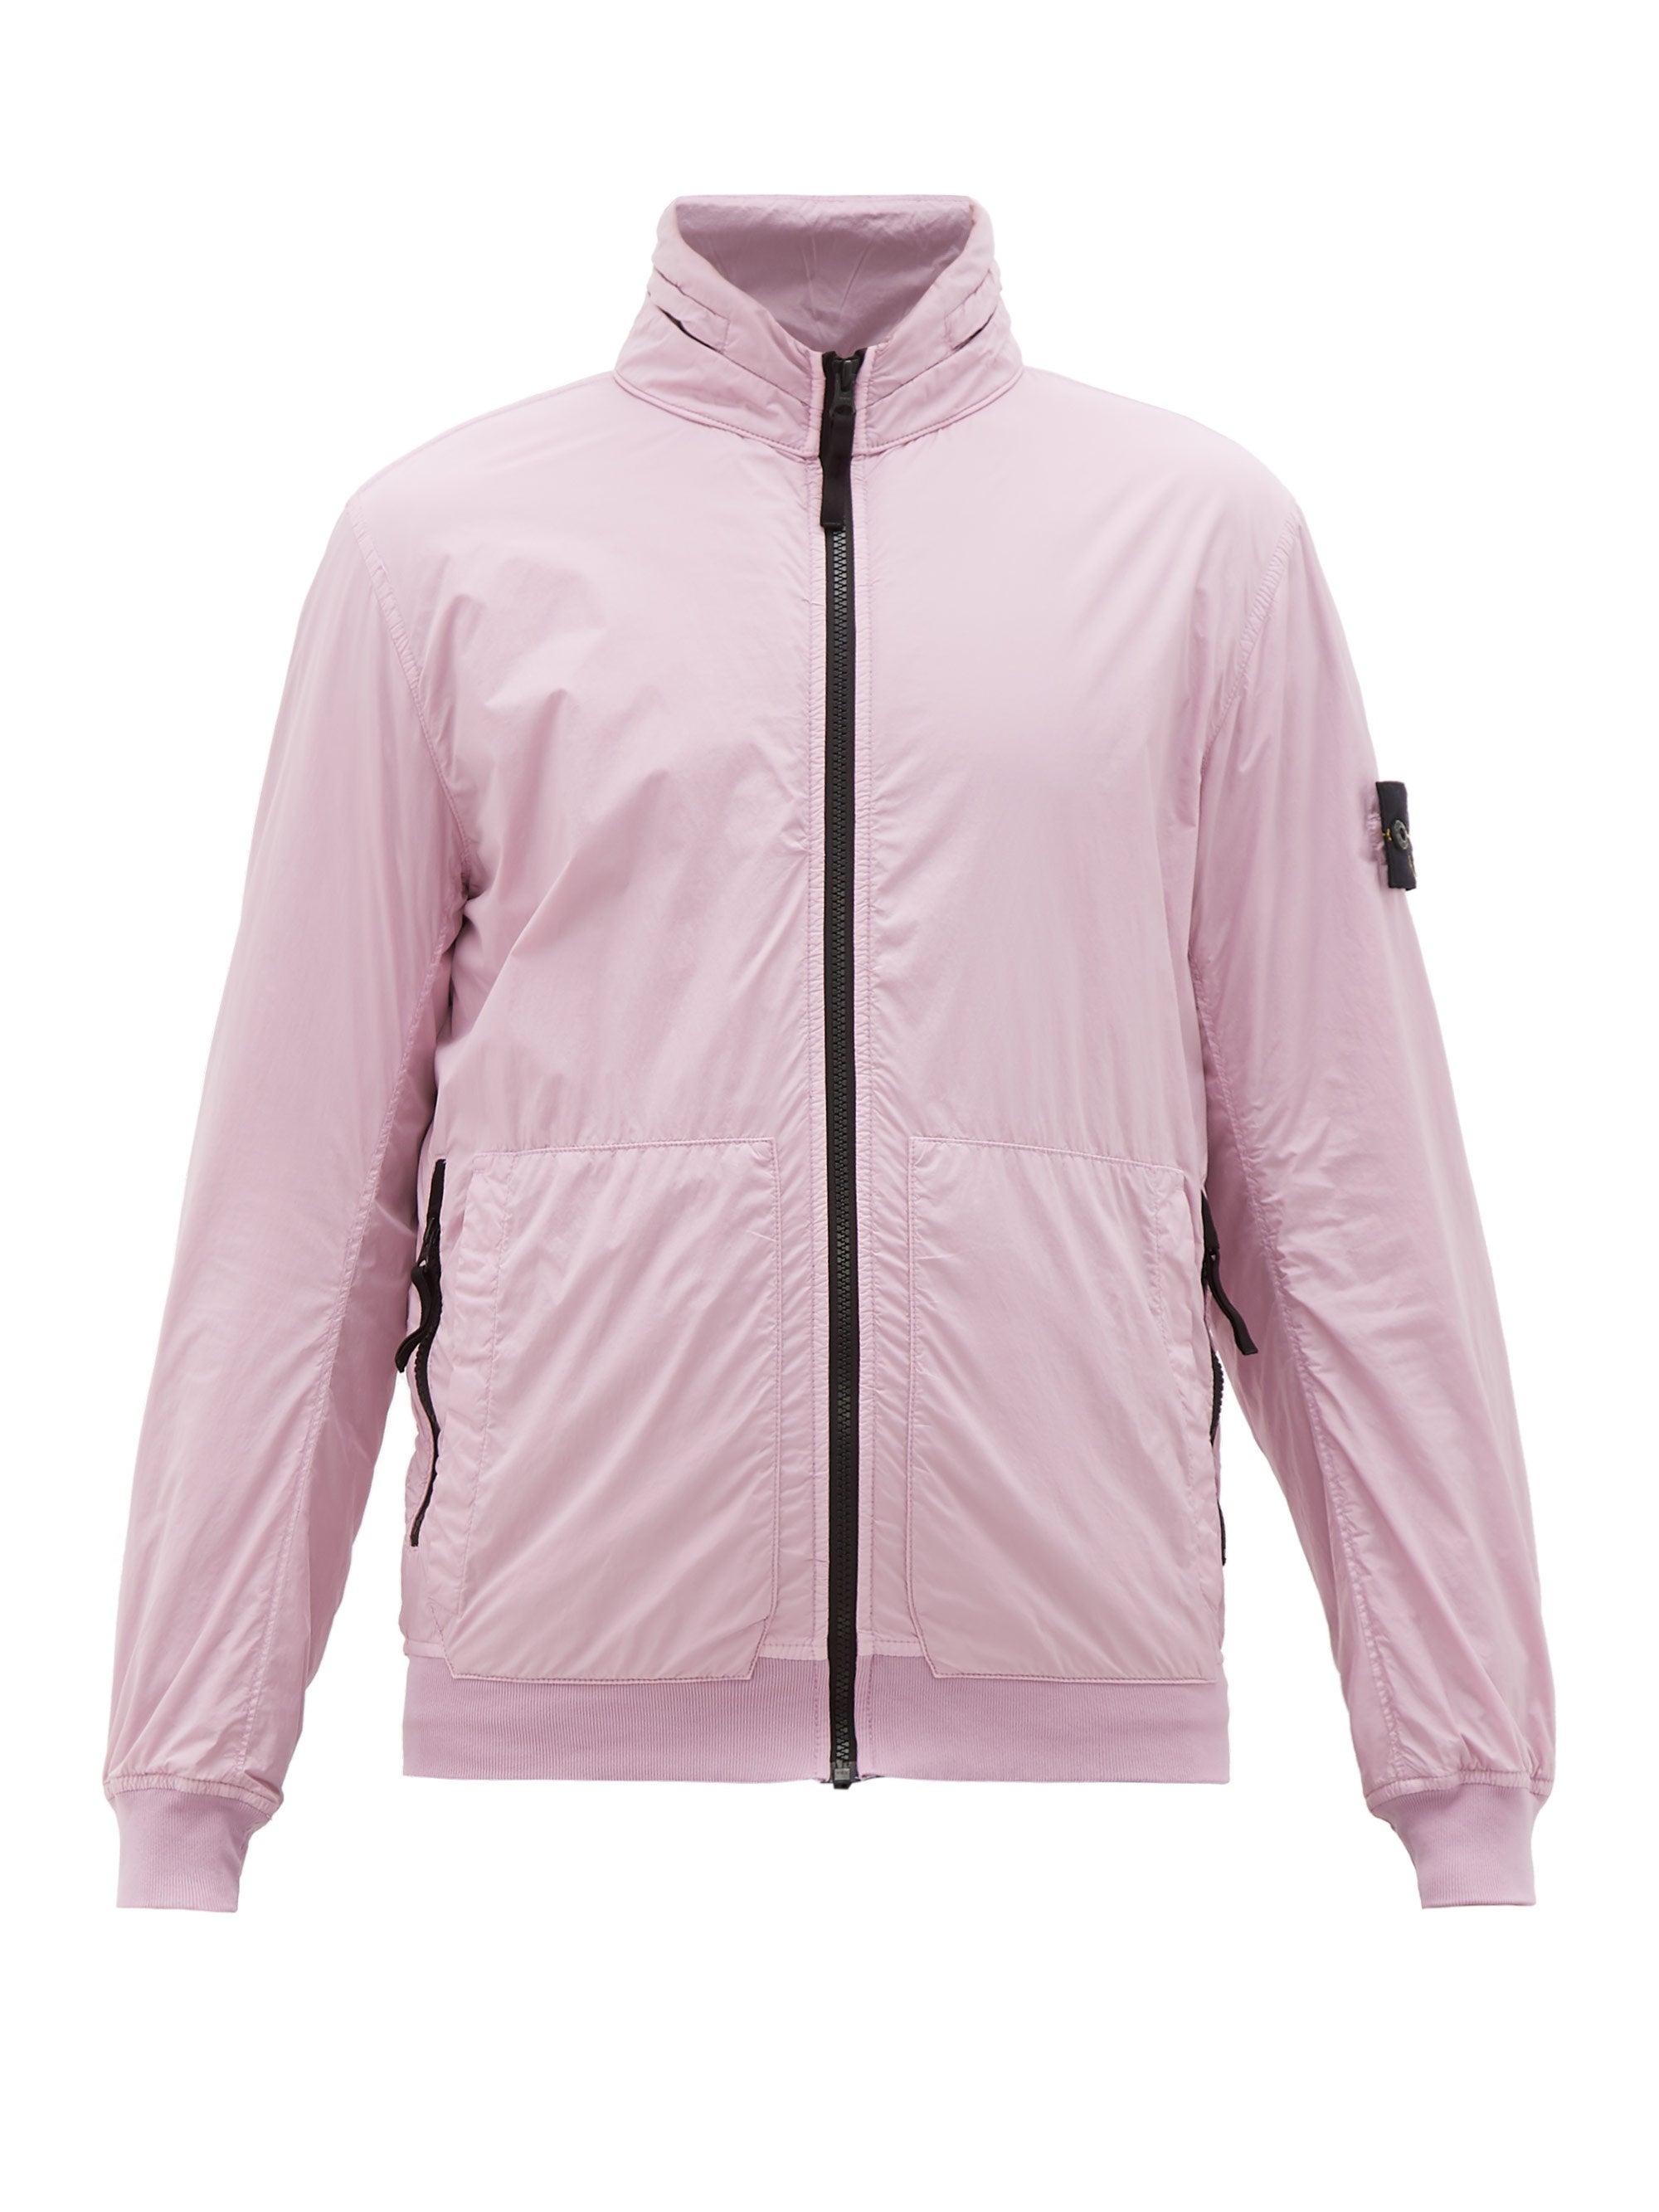 Stone Island Pink Bomber Jacket Norway, SAVE 50% - pacificlanding.ca